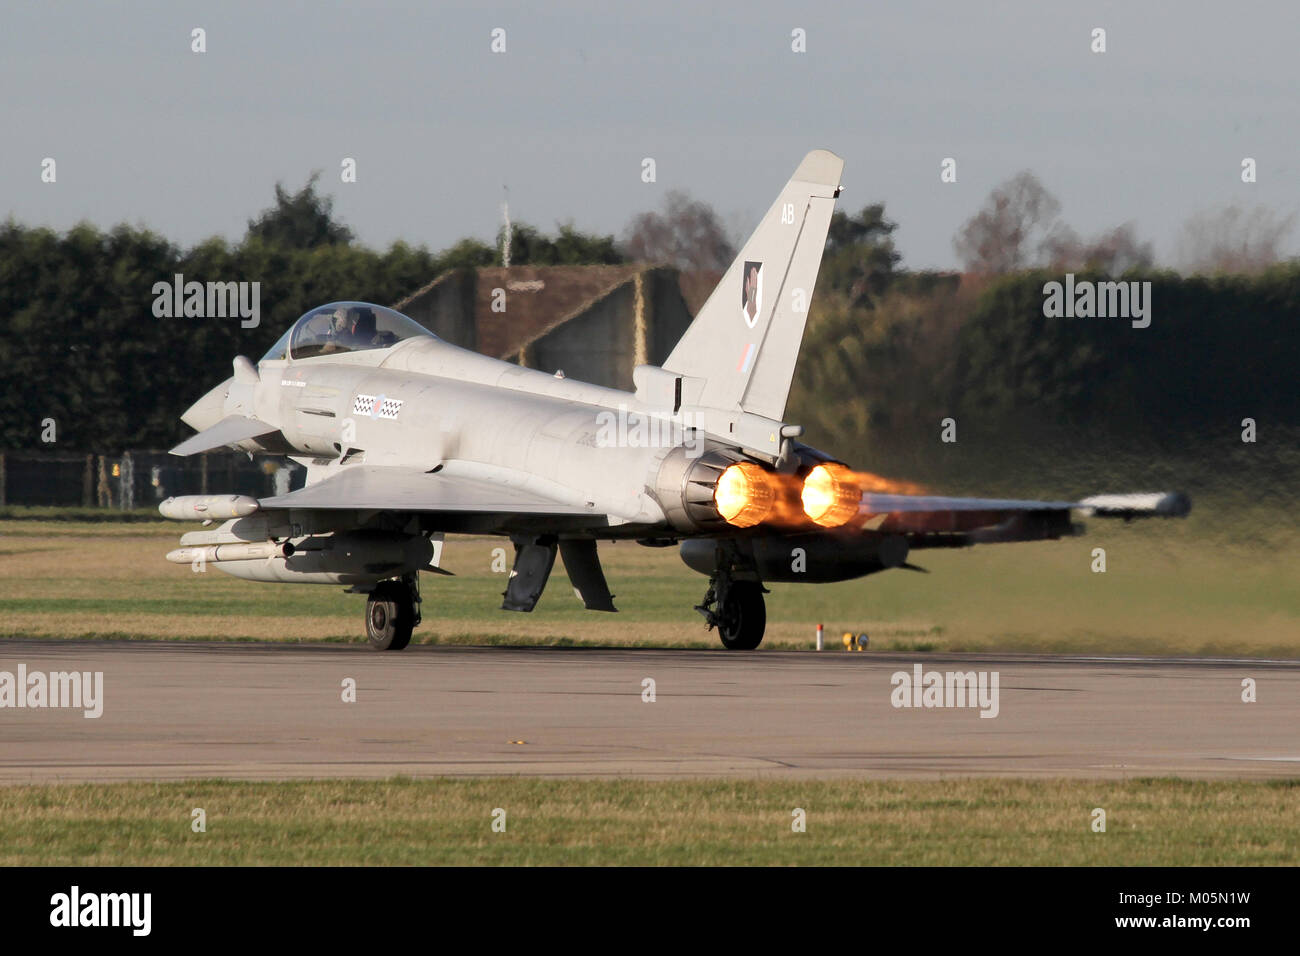 RAF Eurofighter Typhoon from 17 Squadron powering down the  Coningsby runway in full reheat/afterburner, which is rarely used. Stock Photo